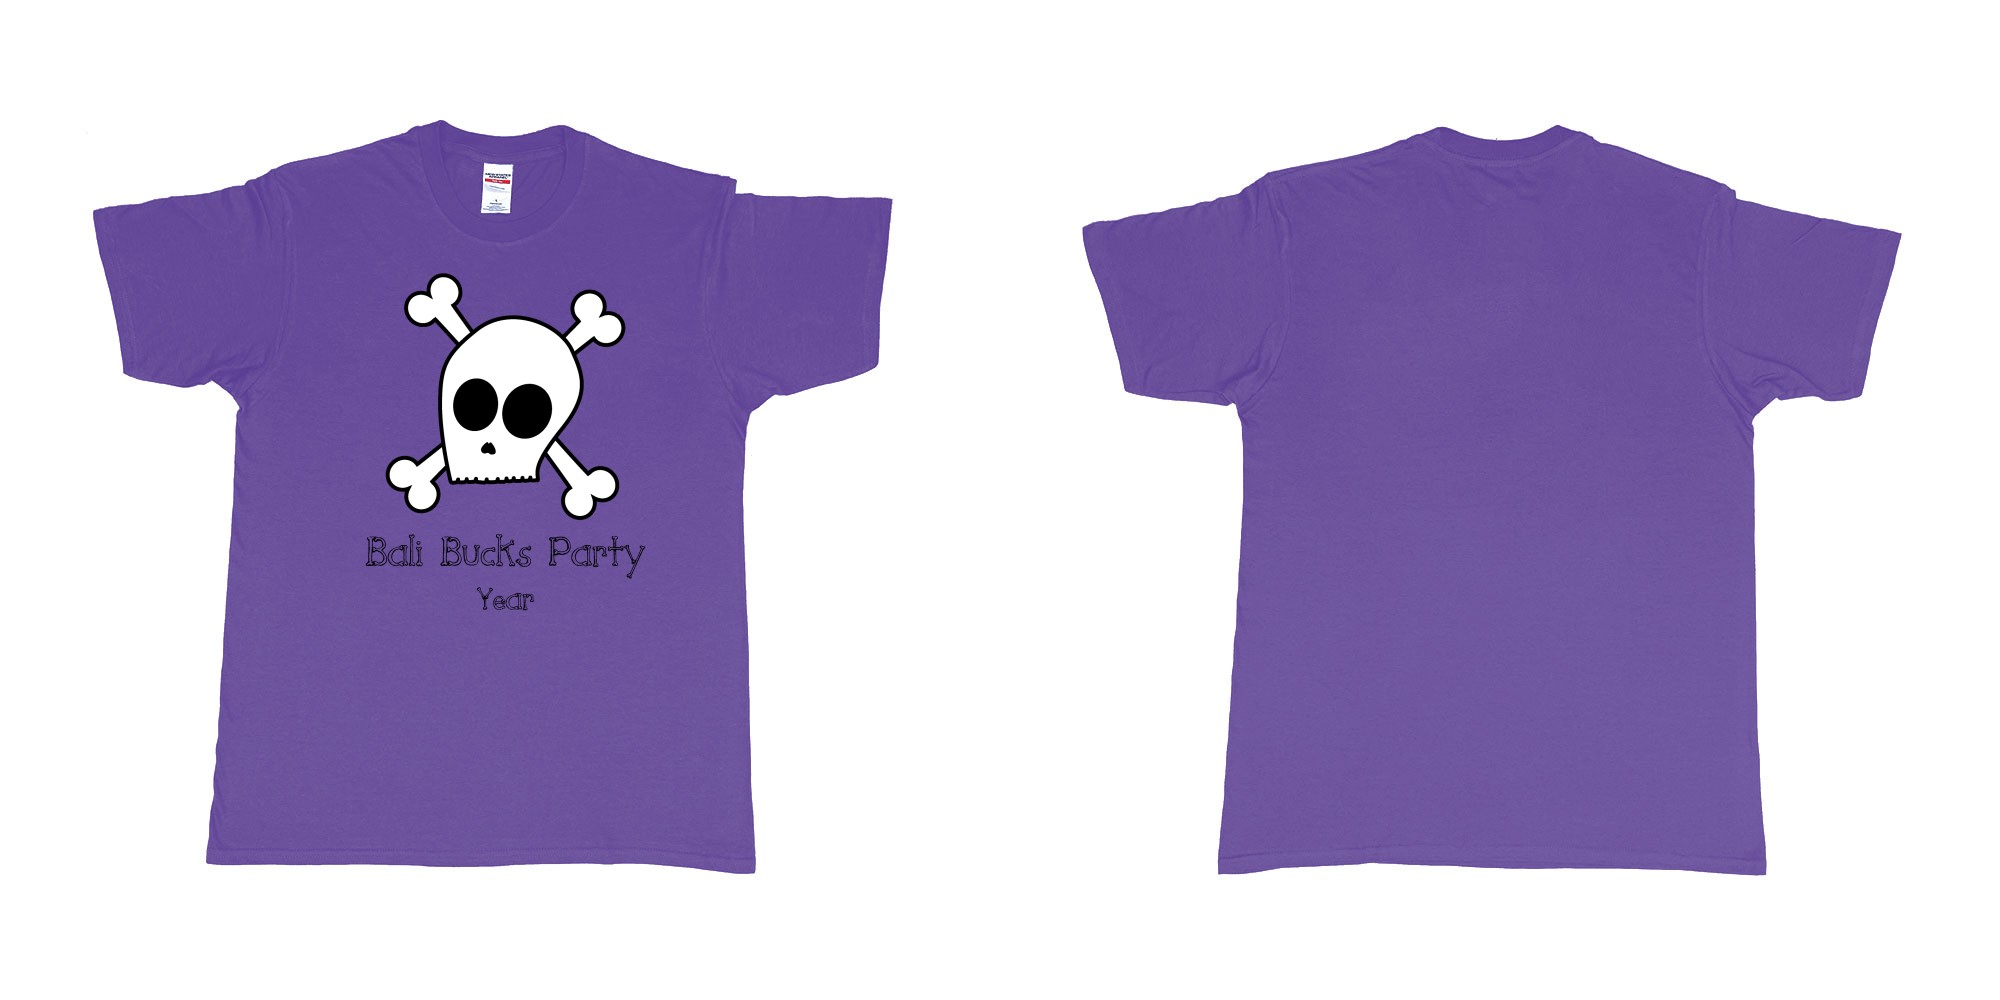 Custom tshirt design bali bucks party skull in fabric color purple choice your own text made in Bali by The Pirate Way